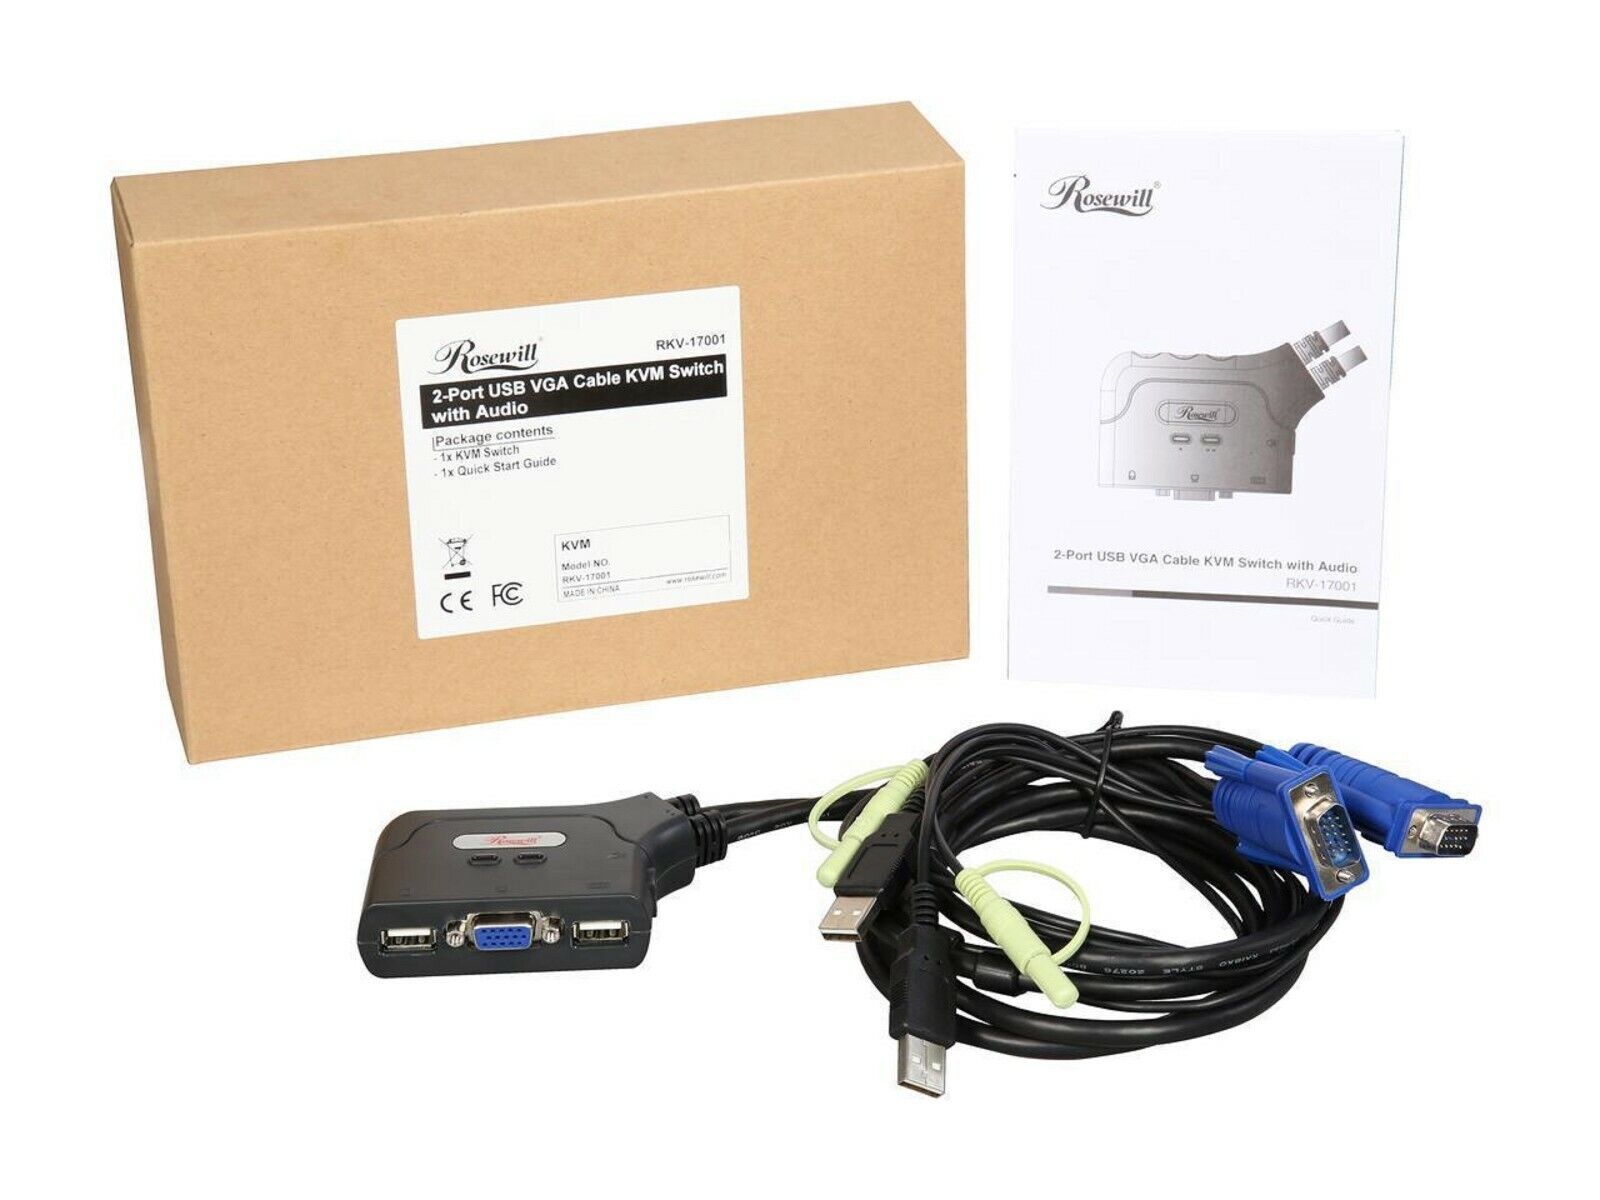 2-port USB VGA cable KVM switch with audio